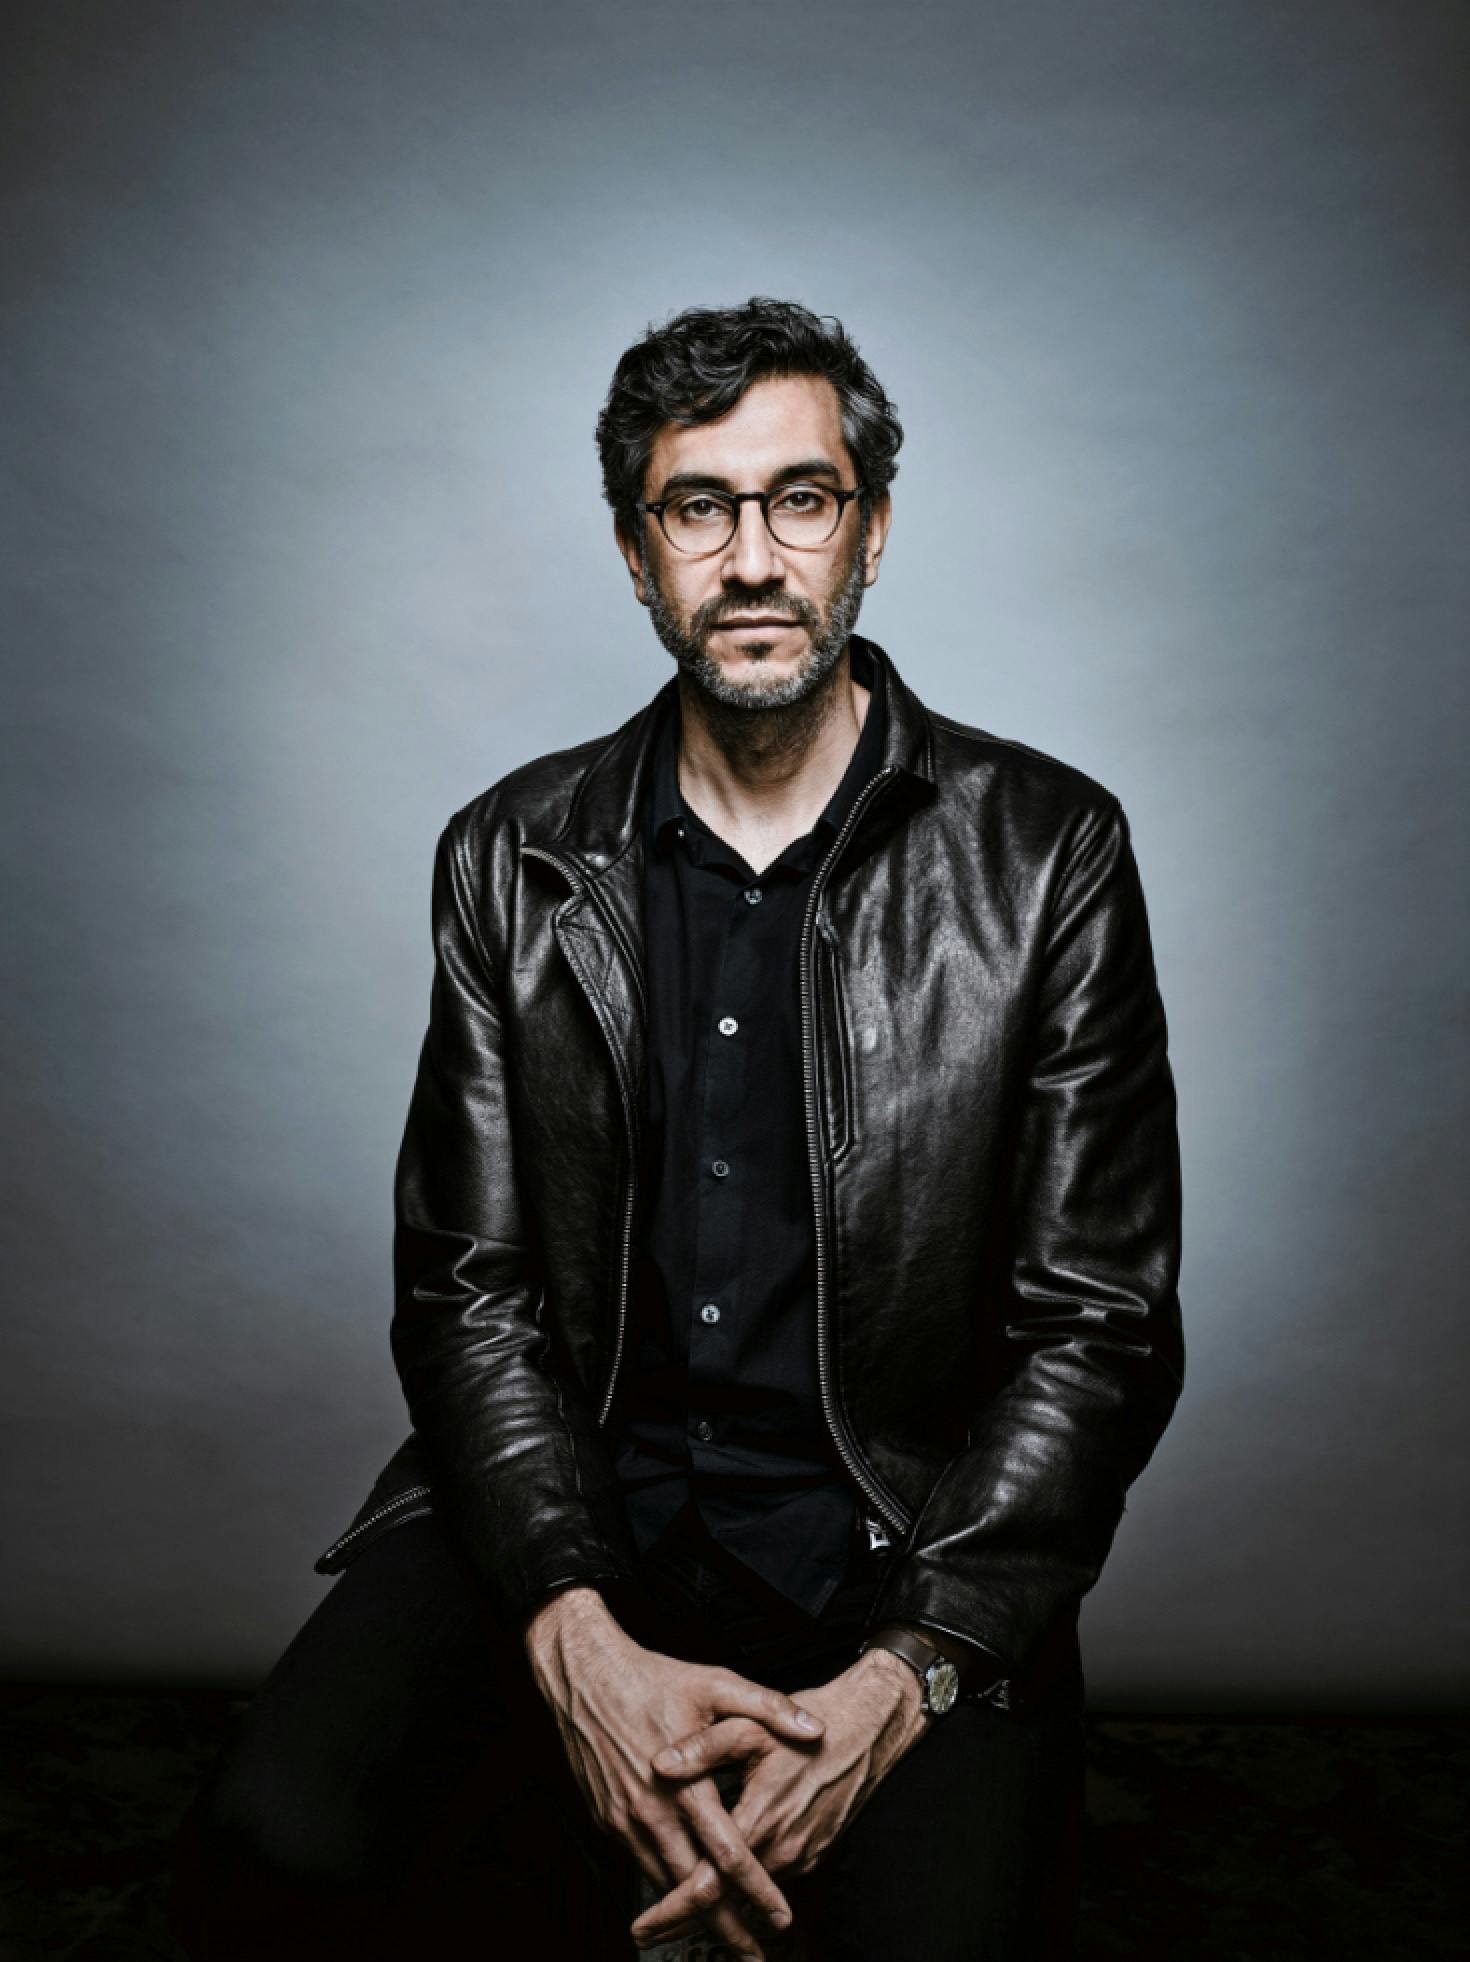 Ramin Bahrani is photographed against a gray backdrop. He is in all black, including a leather jacket, and has his hands laced on his lap. 